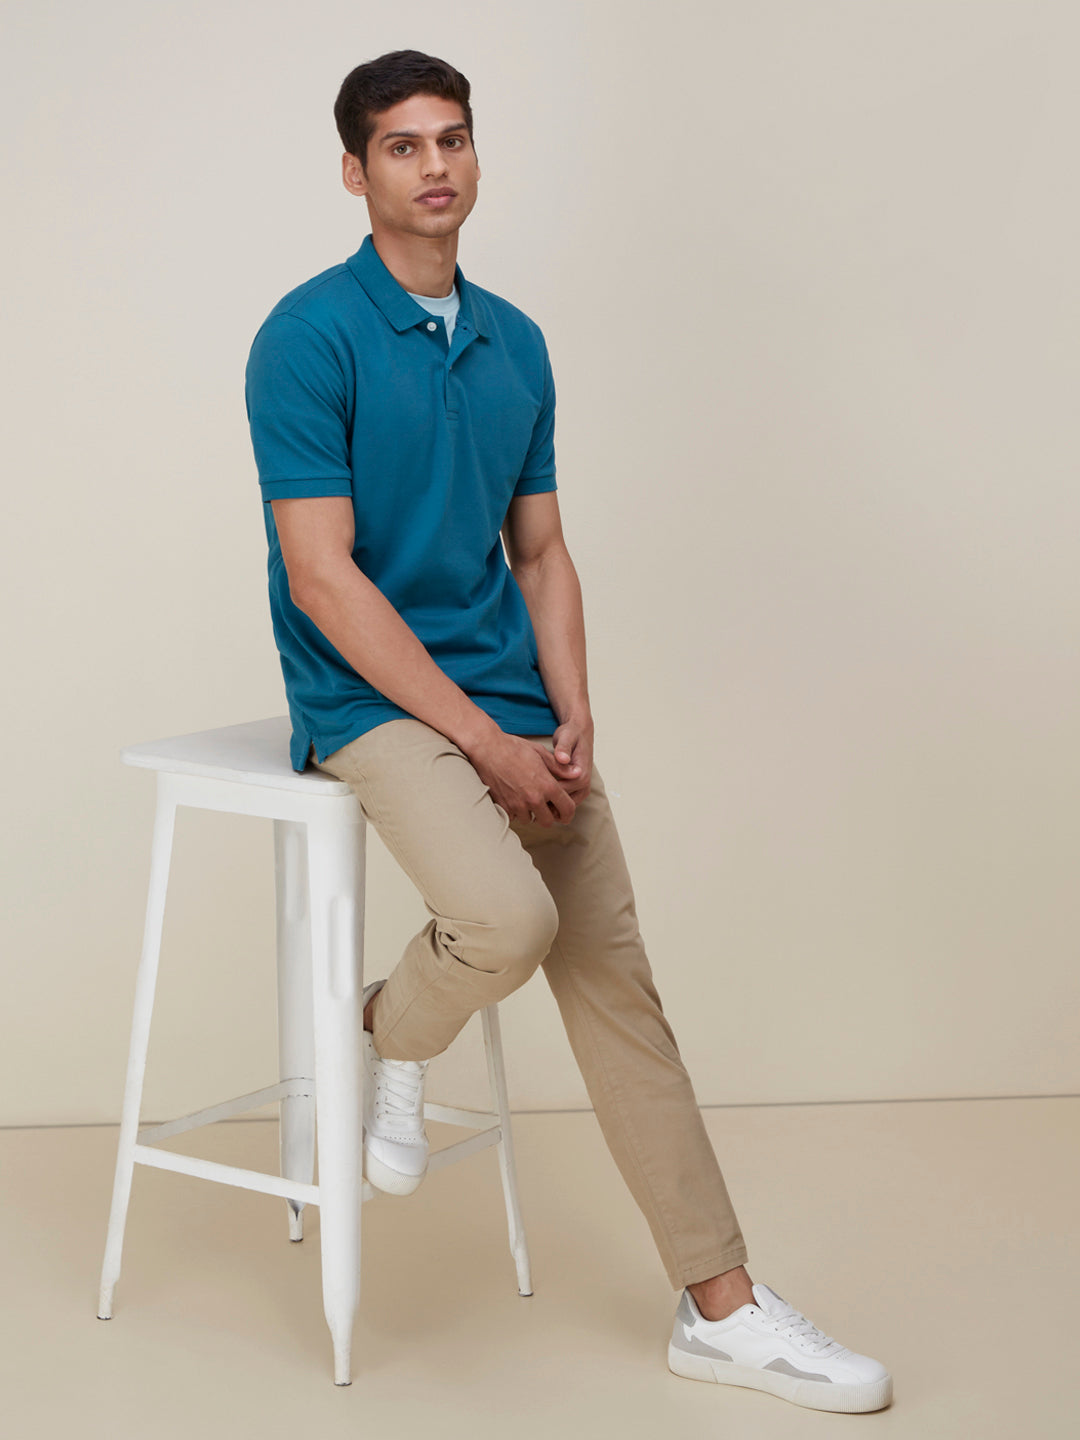 WES Casuals Teal Slim-Fit Polo T-Shirt | Teal Slim-Fit Polo T-Shirt for Men Full View - Westside